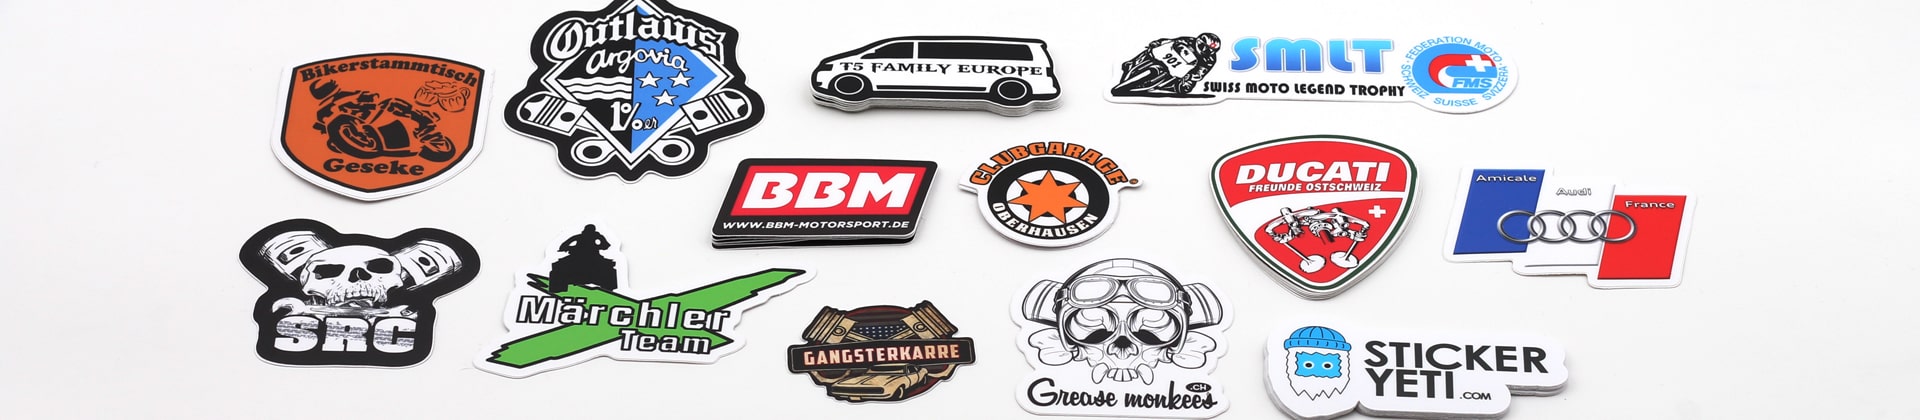 Shop high quality company logo stickers, product stickers, quickly print online startup stickers